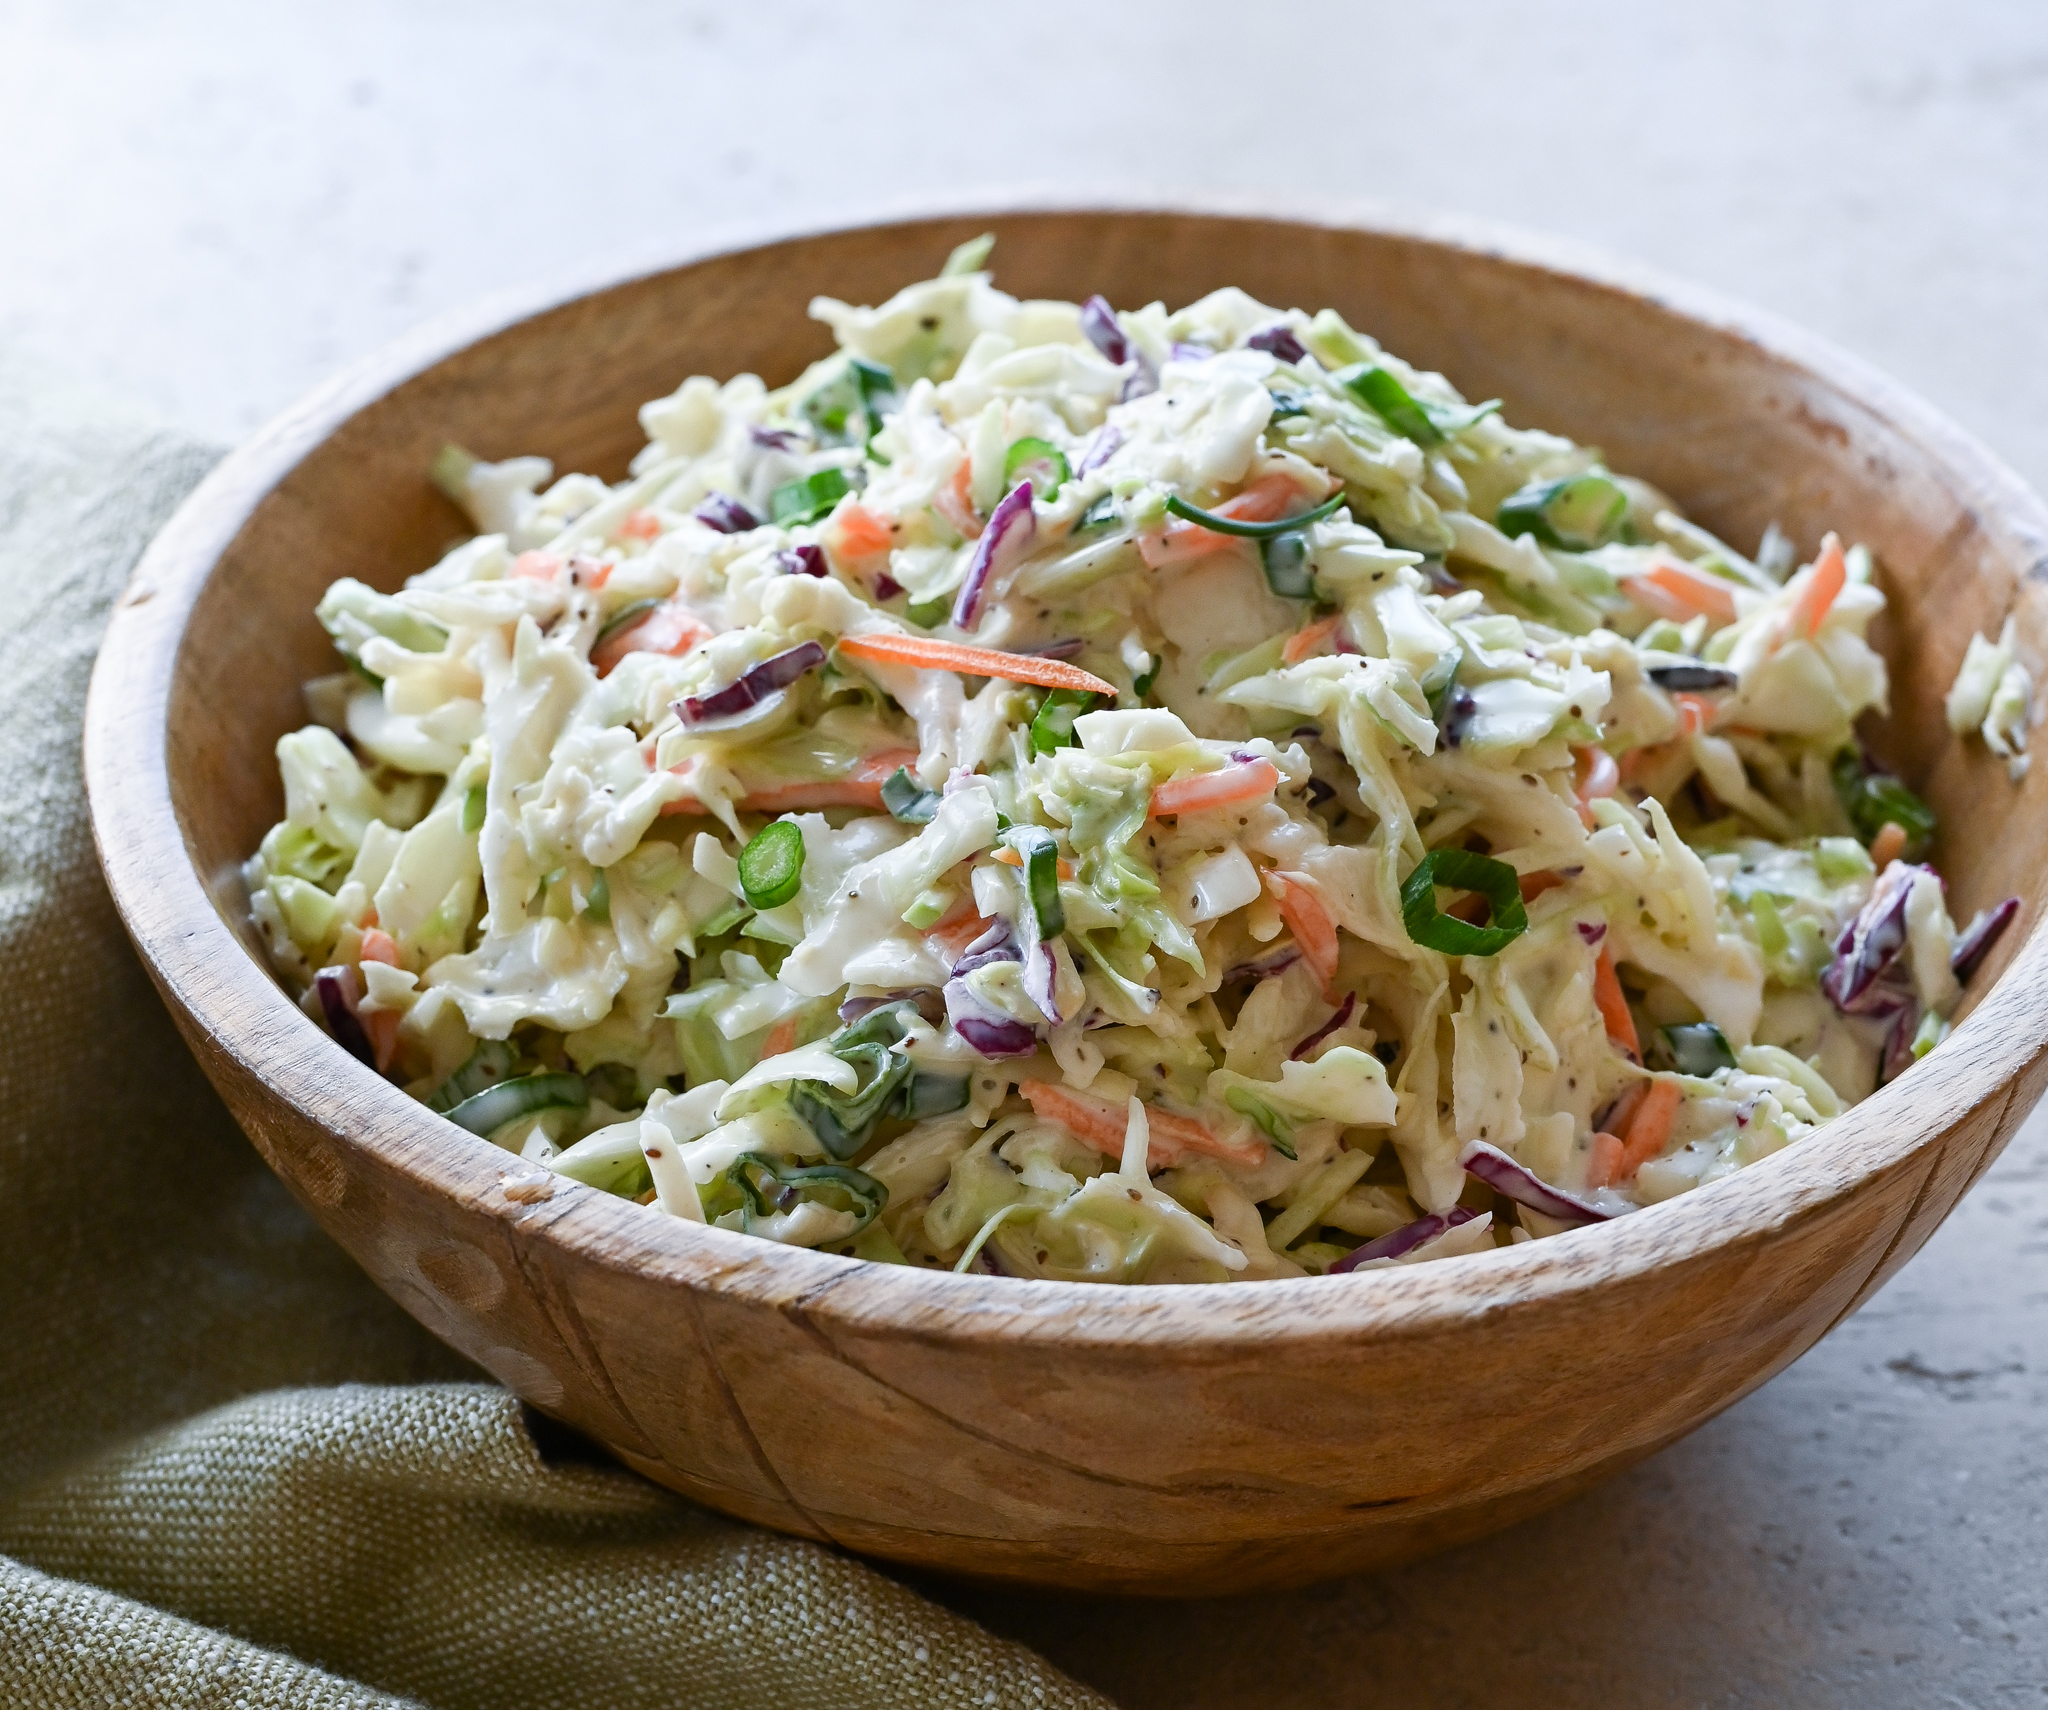 Coleslaw Recipe Hellmann'S: Step by Step Guide